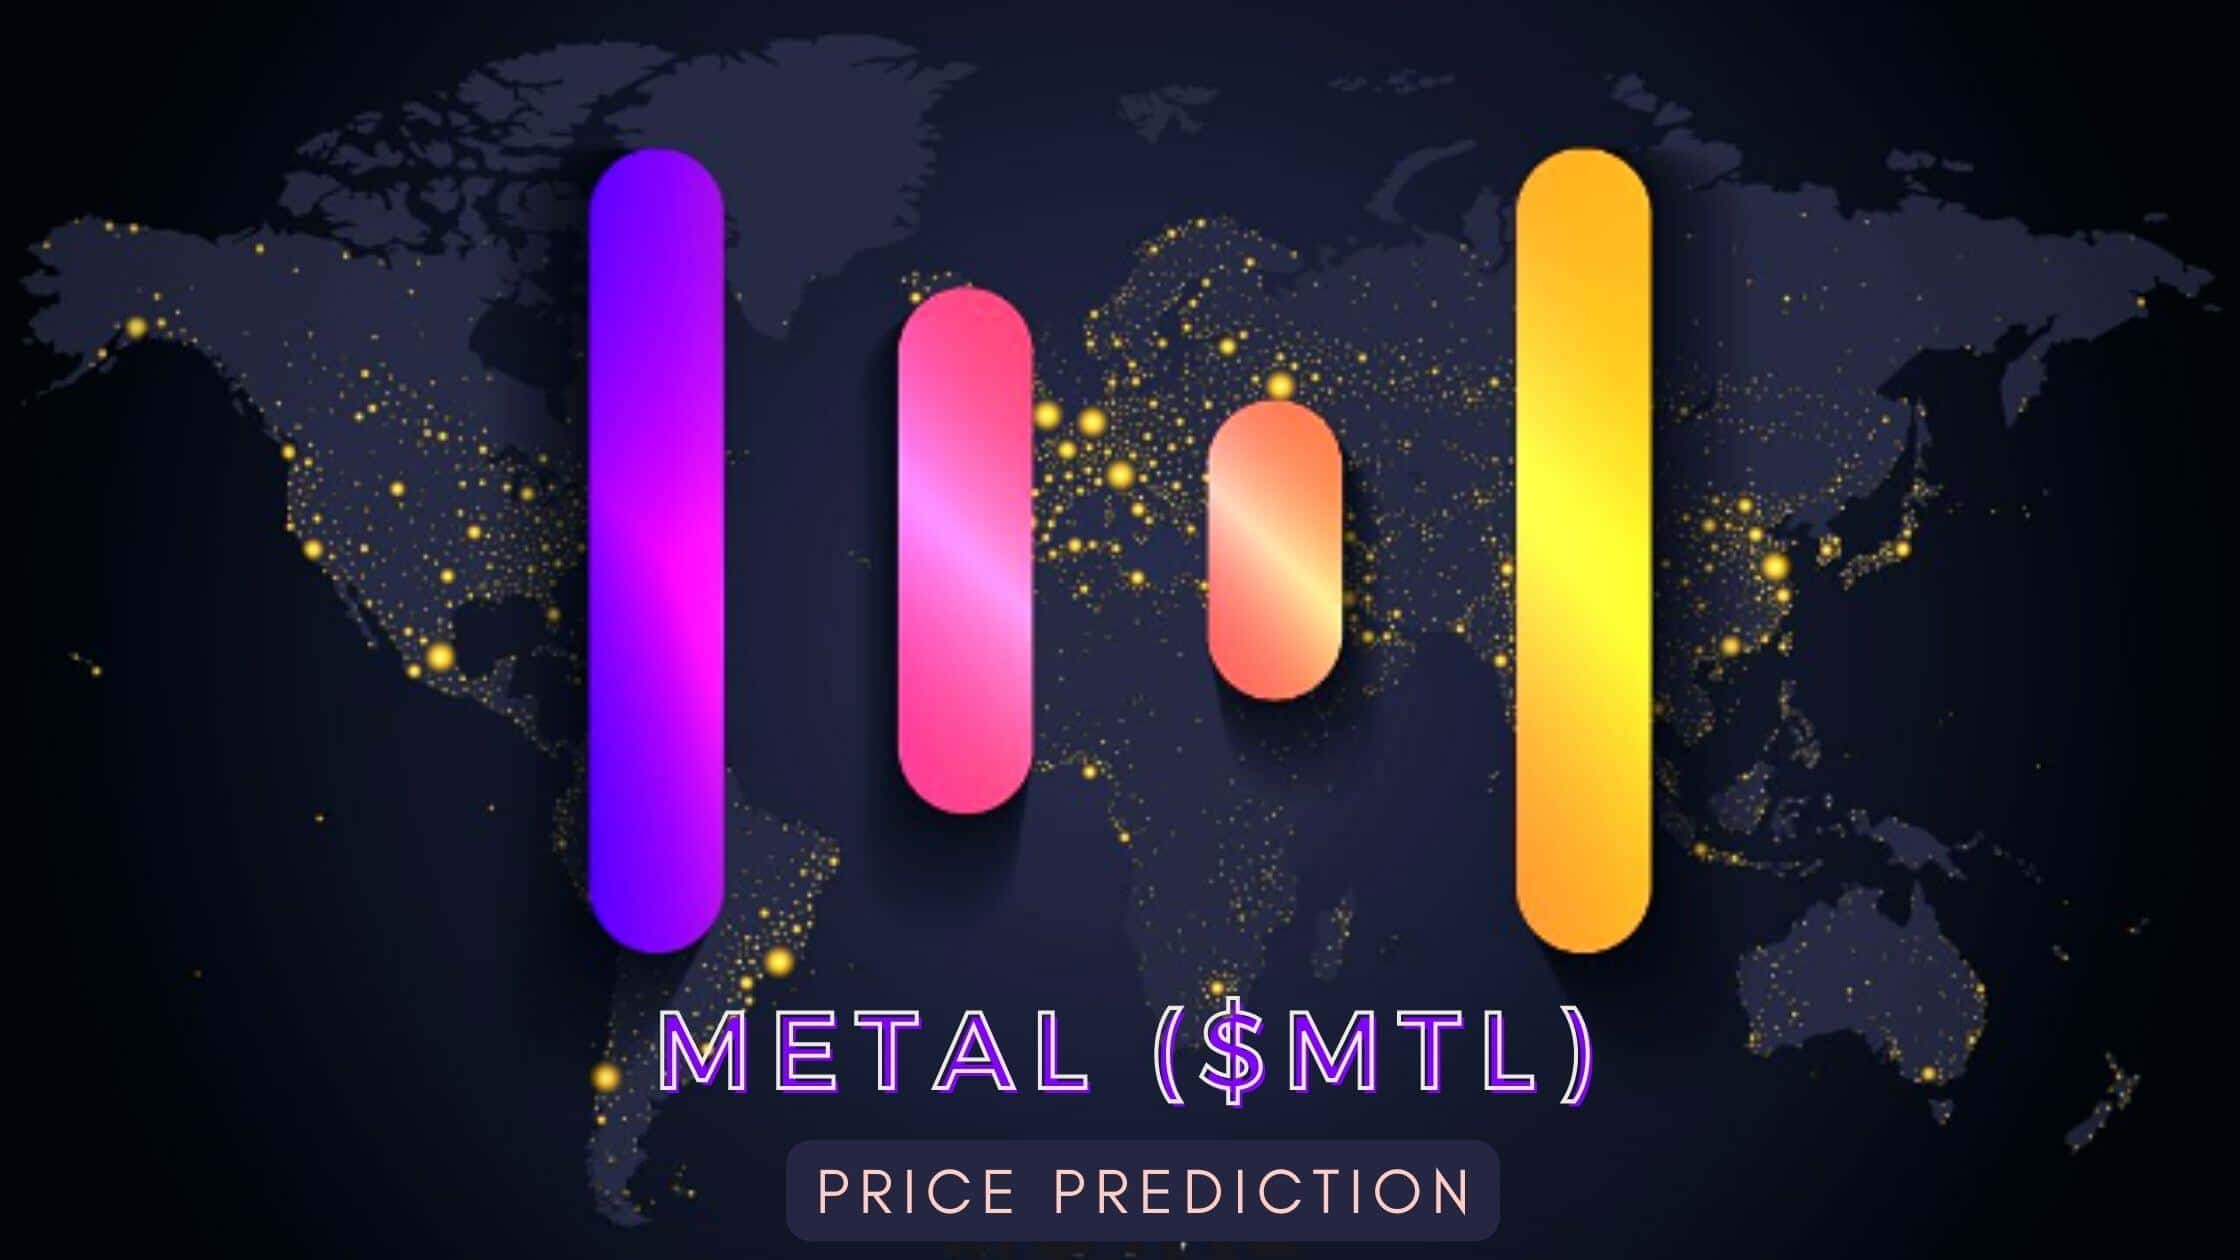 METAL ($MTL) Price Prediction - 2023, 2025, 2030 What Will Be The Future